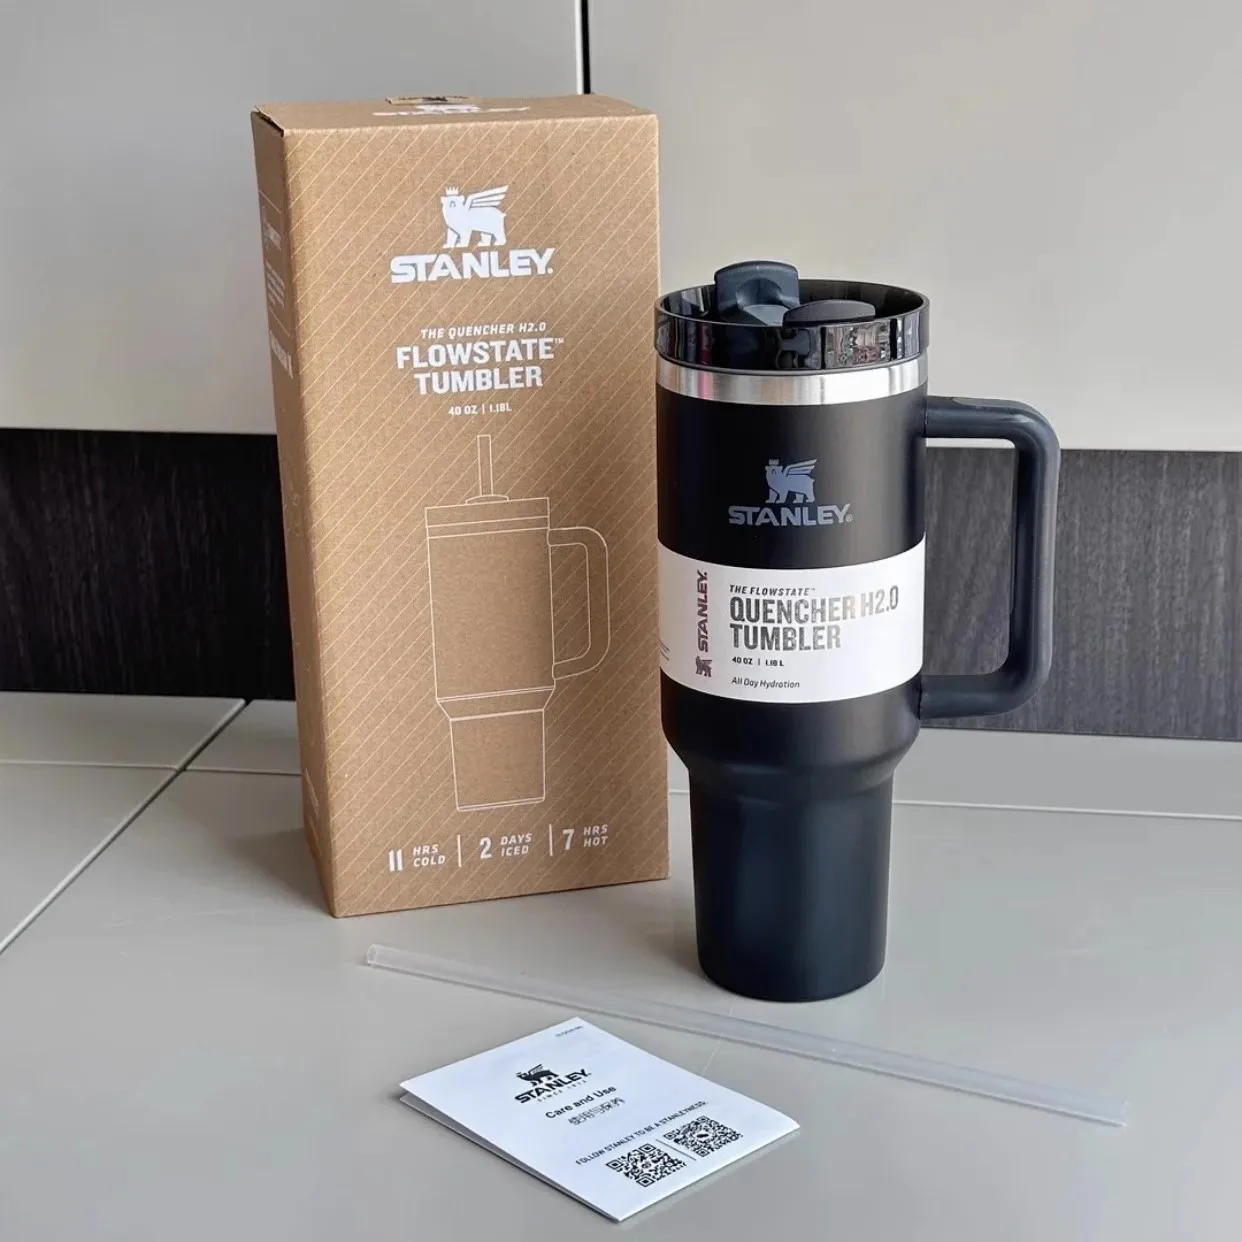 https://ae01.alicdn.com/kf/Sdbc6c589c1564fa094110801d4a7b6e3x/Stanley-Quencher-H2-0-FlowState-Stainless-Steel-Vacuum-Insulated-Tumbler-with-Lid-and-Straw-for-Water.jpg